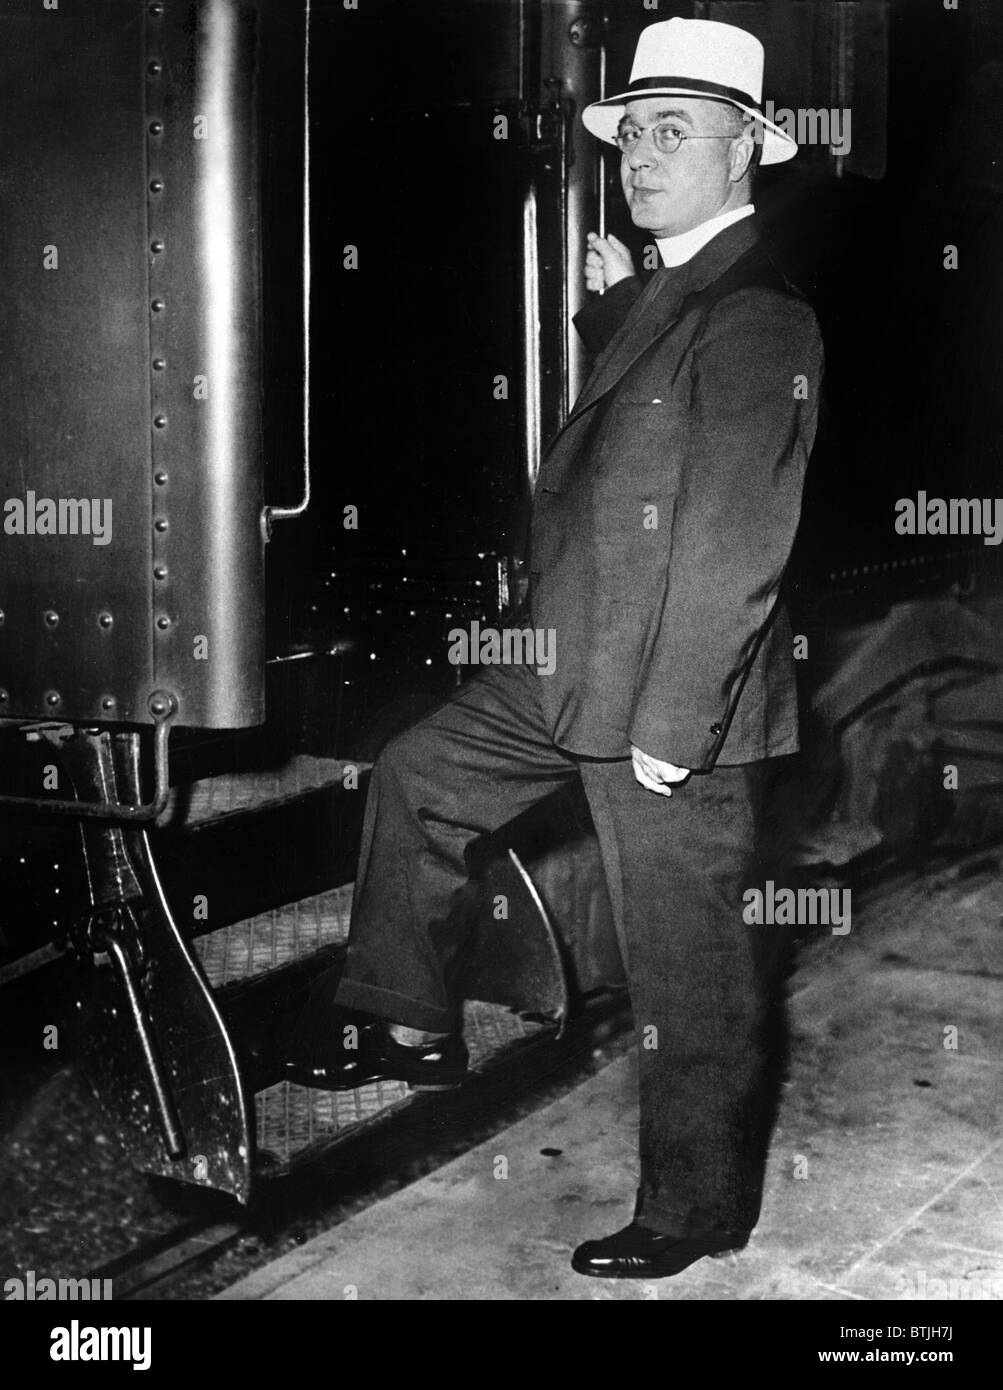 CHARLES EDWARD COUGHLIN, candid on way to Chicago Democratic Convention Stock Photo